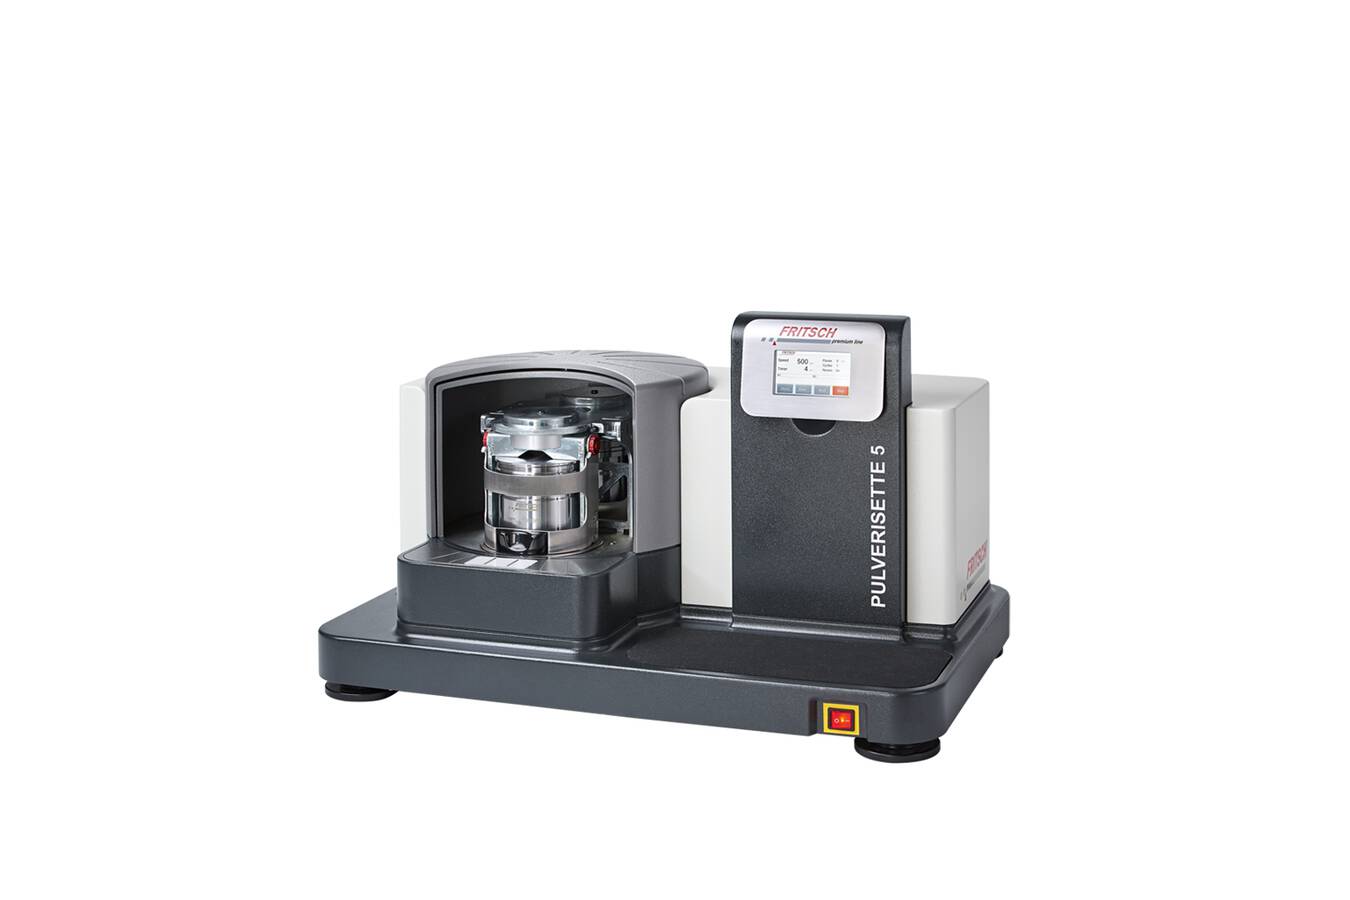 Experience on POWTECH: High-performance grinding down to nano range Grinding has never been as safe and fast
With grinding bowl speeds of up to 2200 rpm and automatic grinding bowl clamping by the mill itself